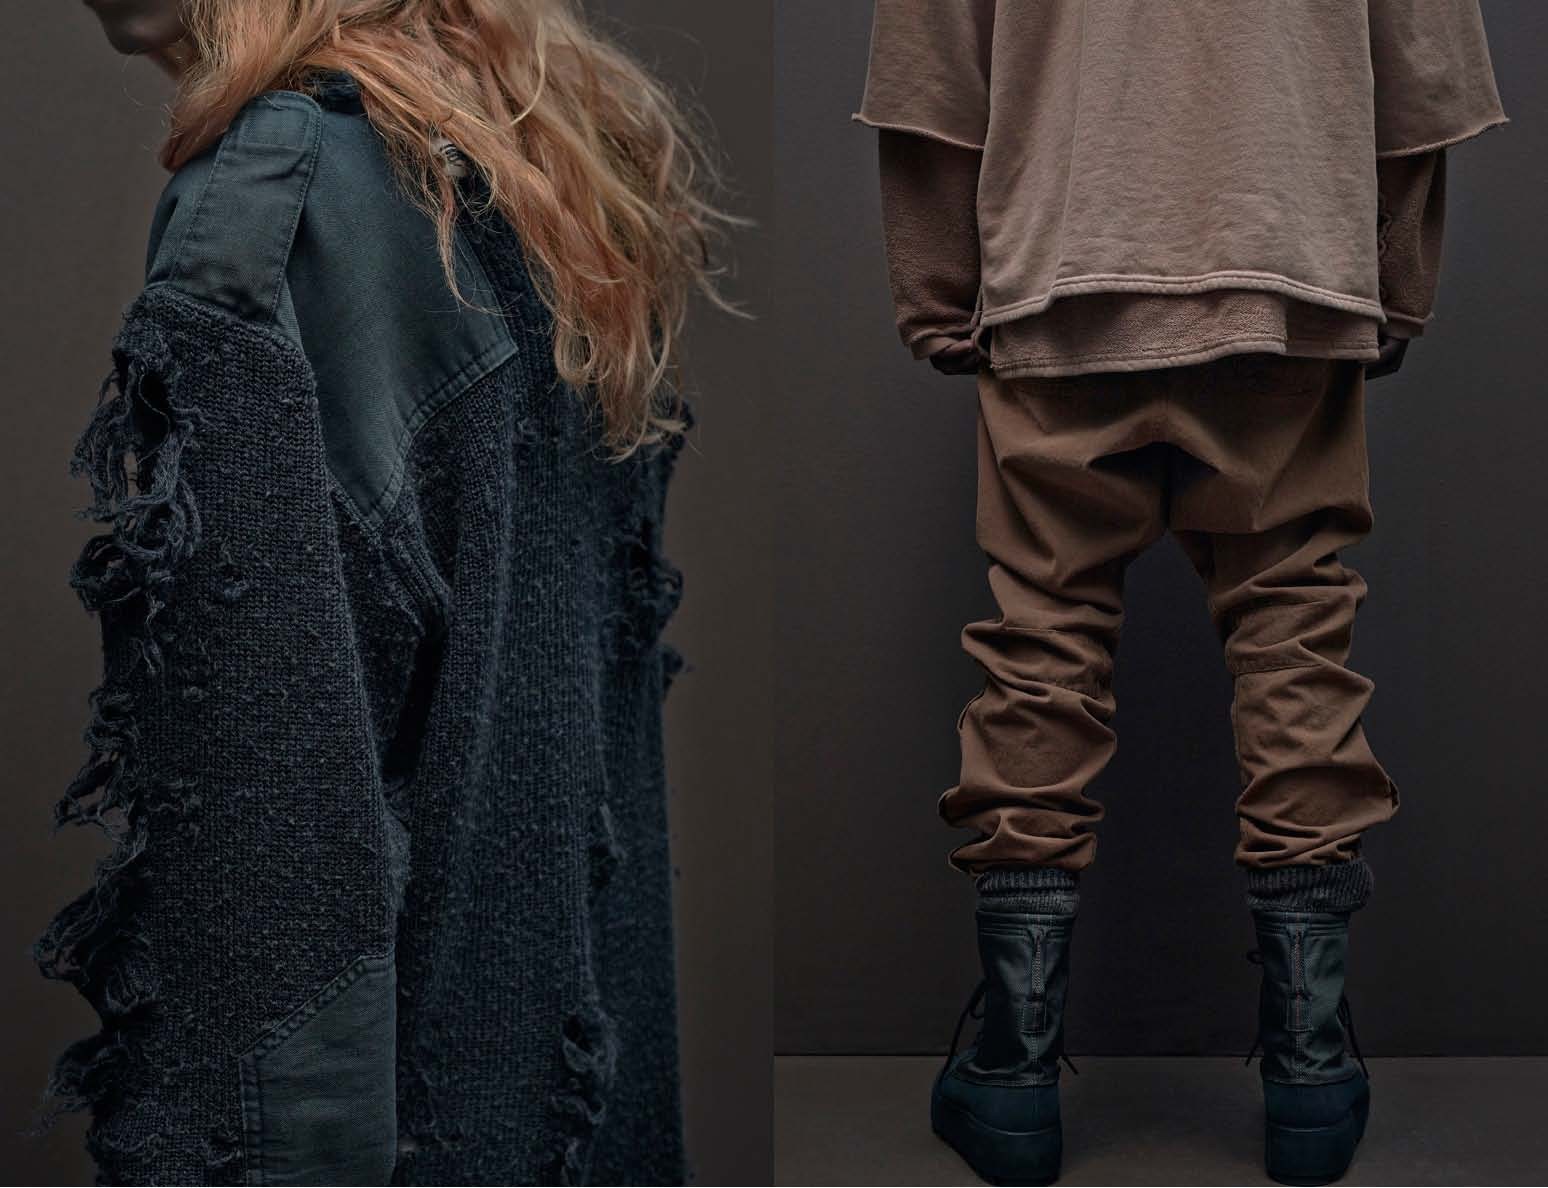 https://snobette.com/wp-content/uploads/2015/03/YEEZY-Season-One-Photos-by-Jackie-Nickerson_Page_28.jpg